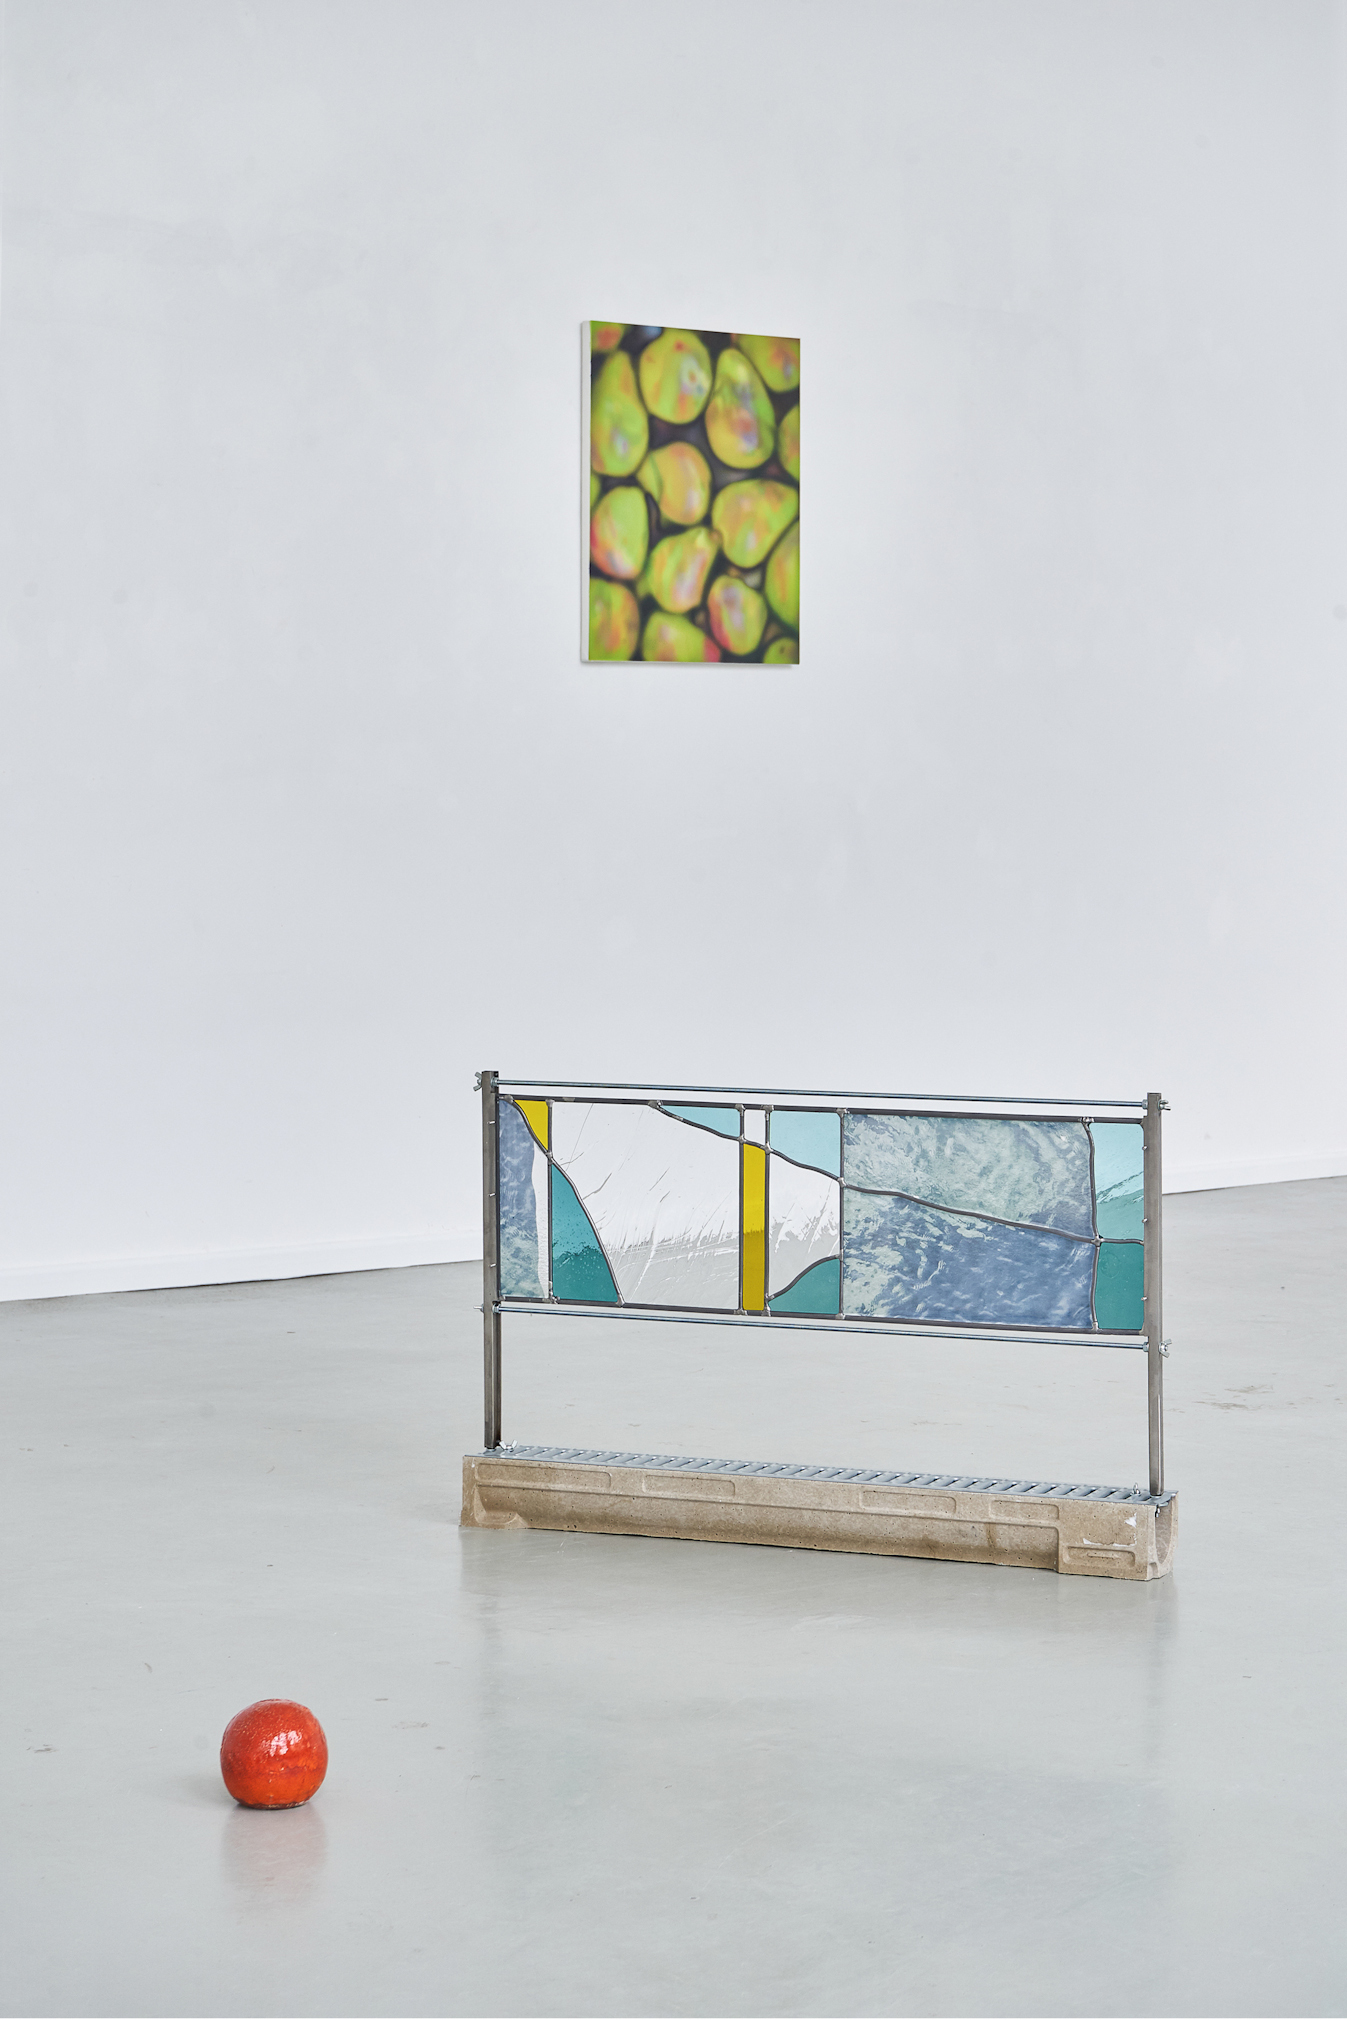 Ju Young Kim, Waters II, 2023, 156 x 59 x 38.5 cm, Collague with printed and colored glass, Stainless, Steel, Grating